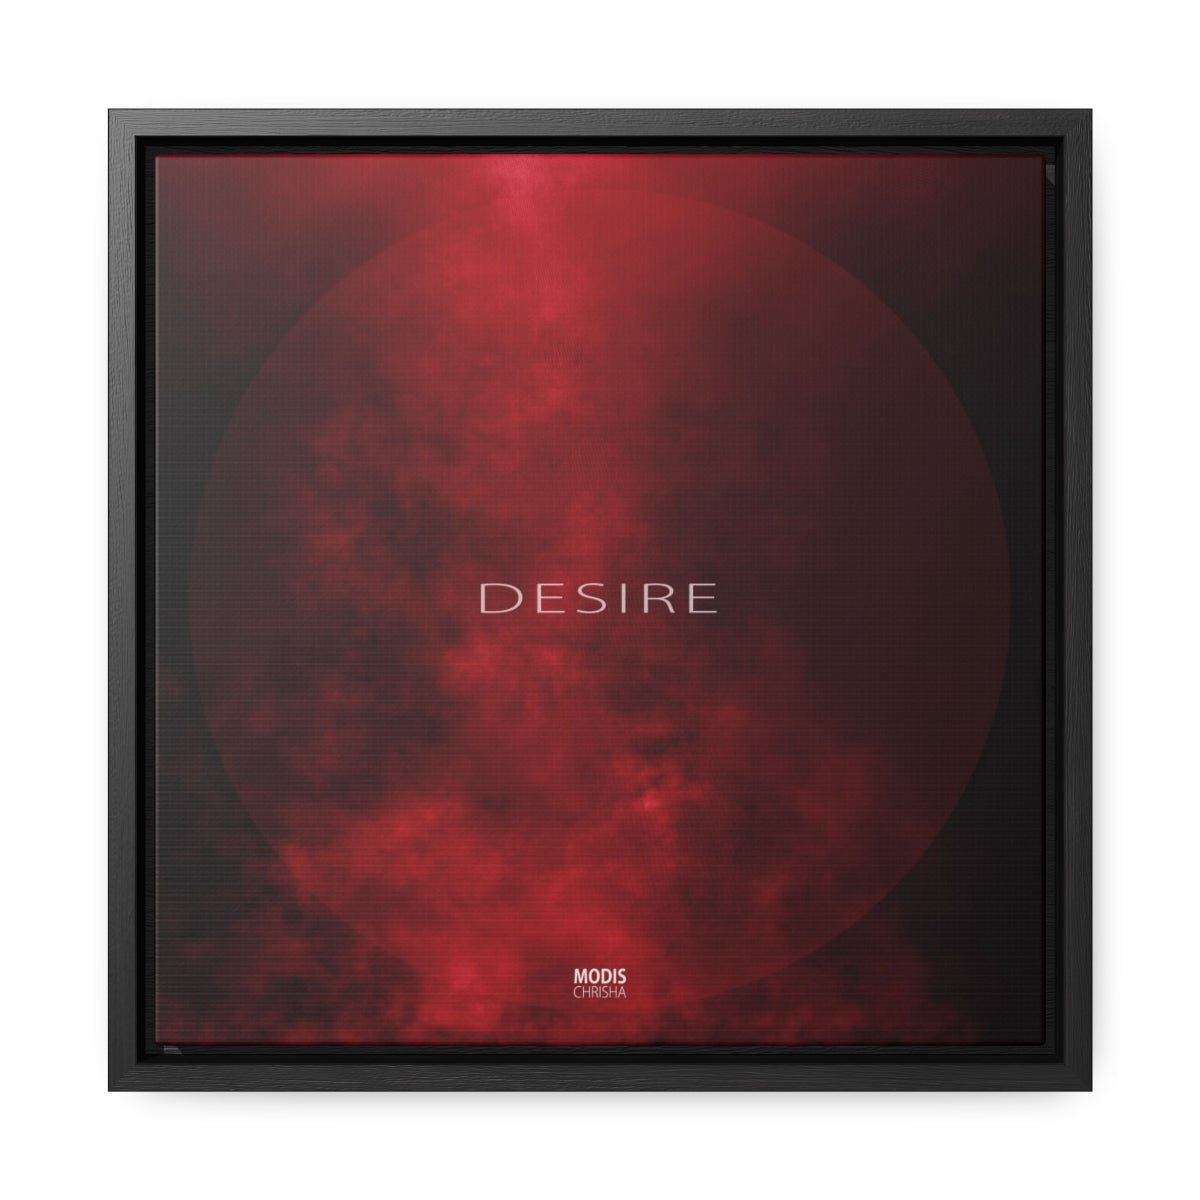 Desire - Square Framed Gallery Wrap Canvas, 12" x 12"